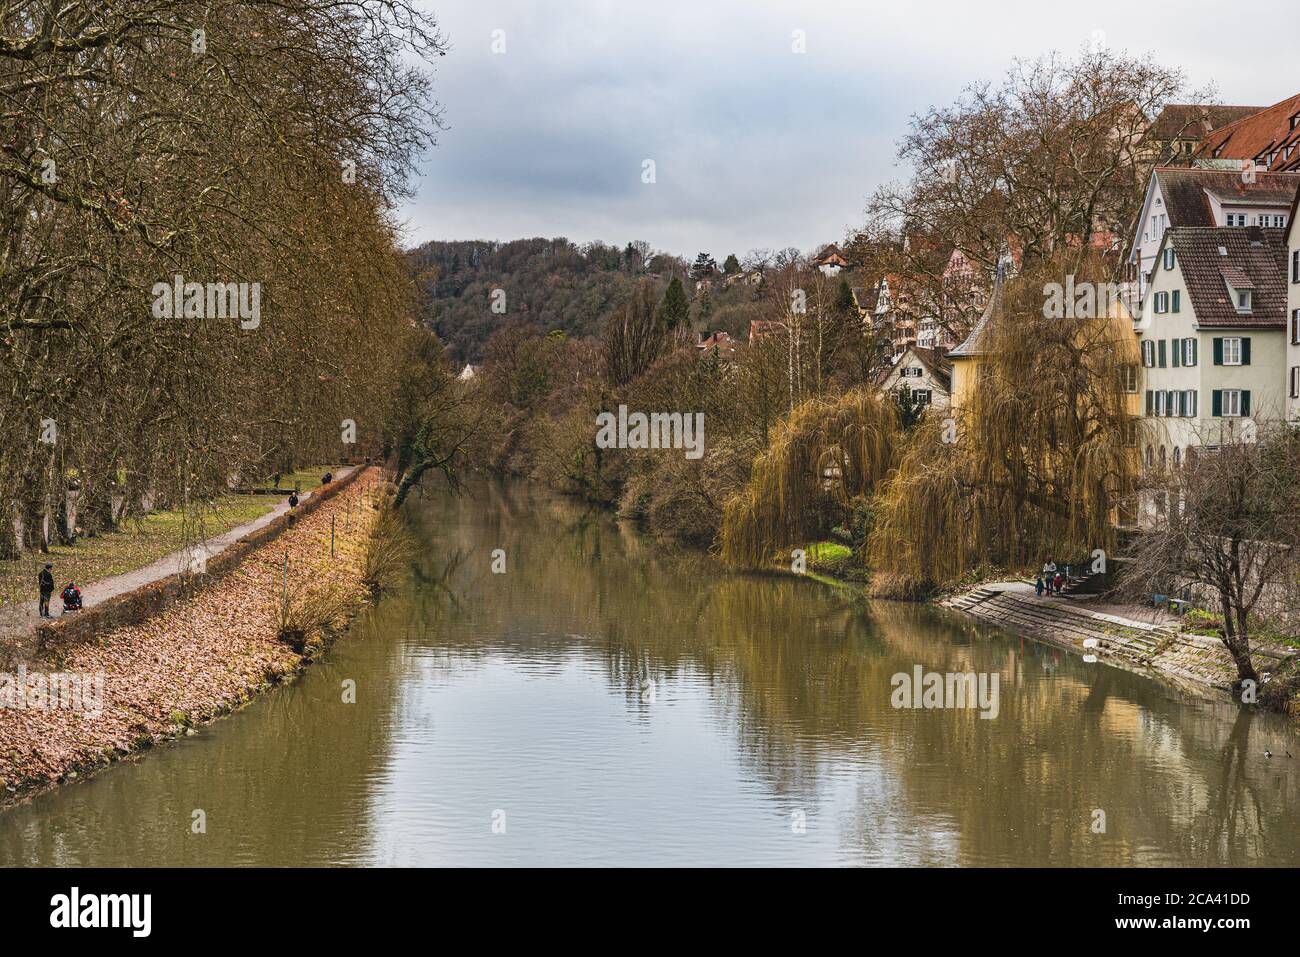 River Neckar view with typical German houses and the Neckarinsel island. Medieval buildings and leafless trees reflect on the water at the Neckarfront Stock Photo